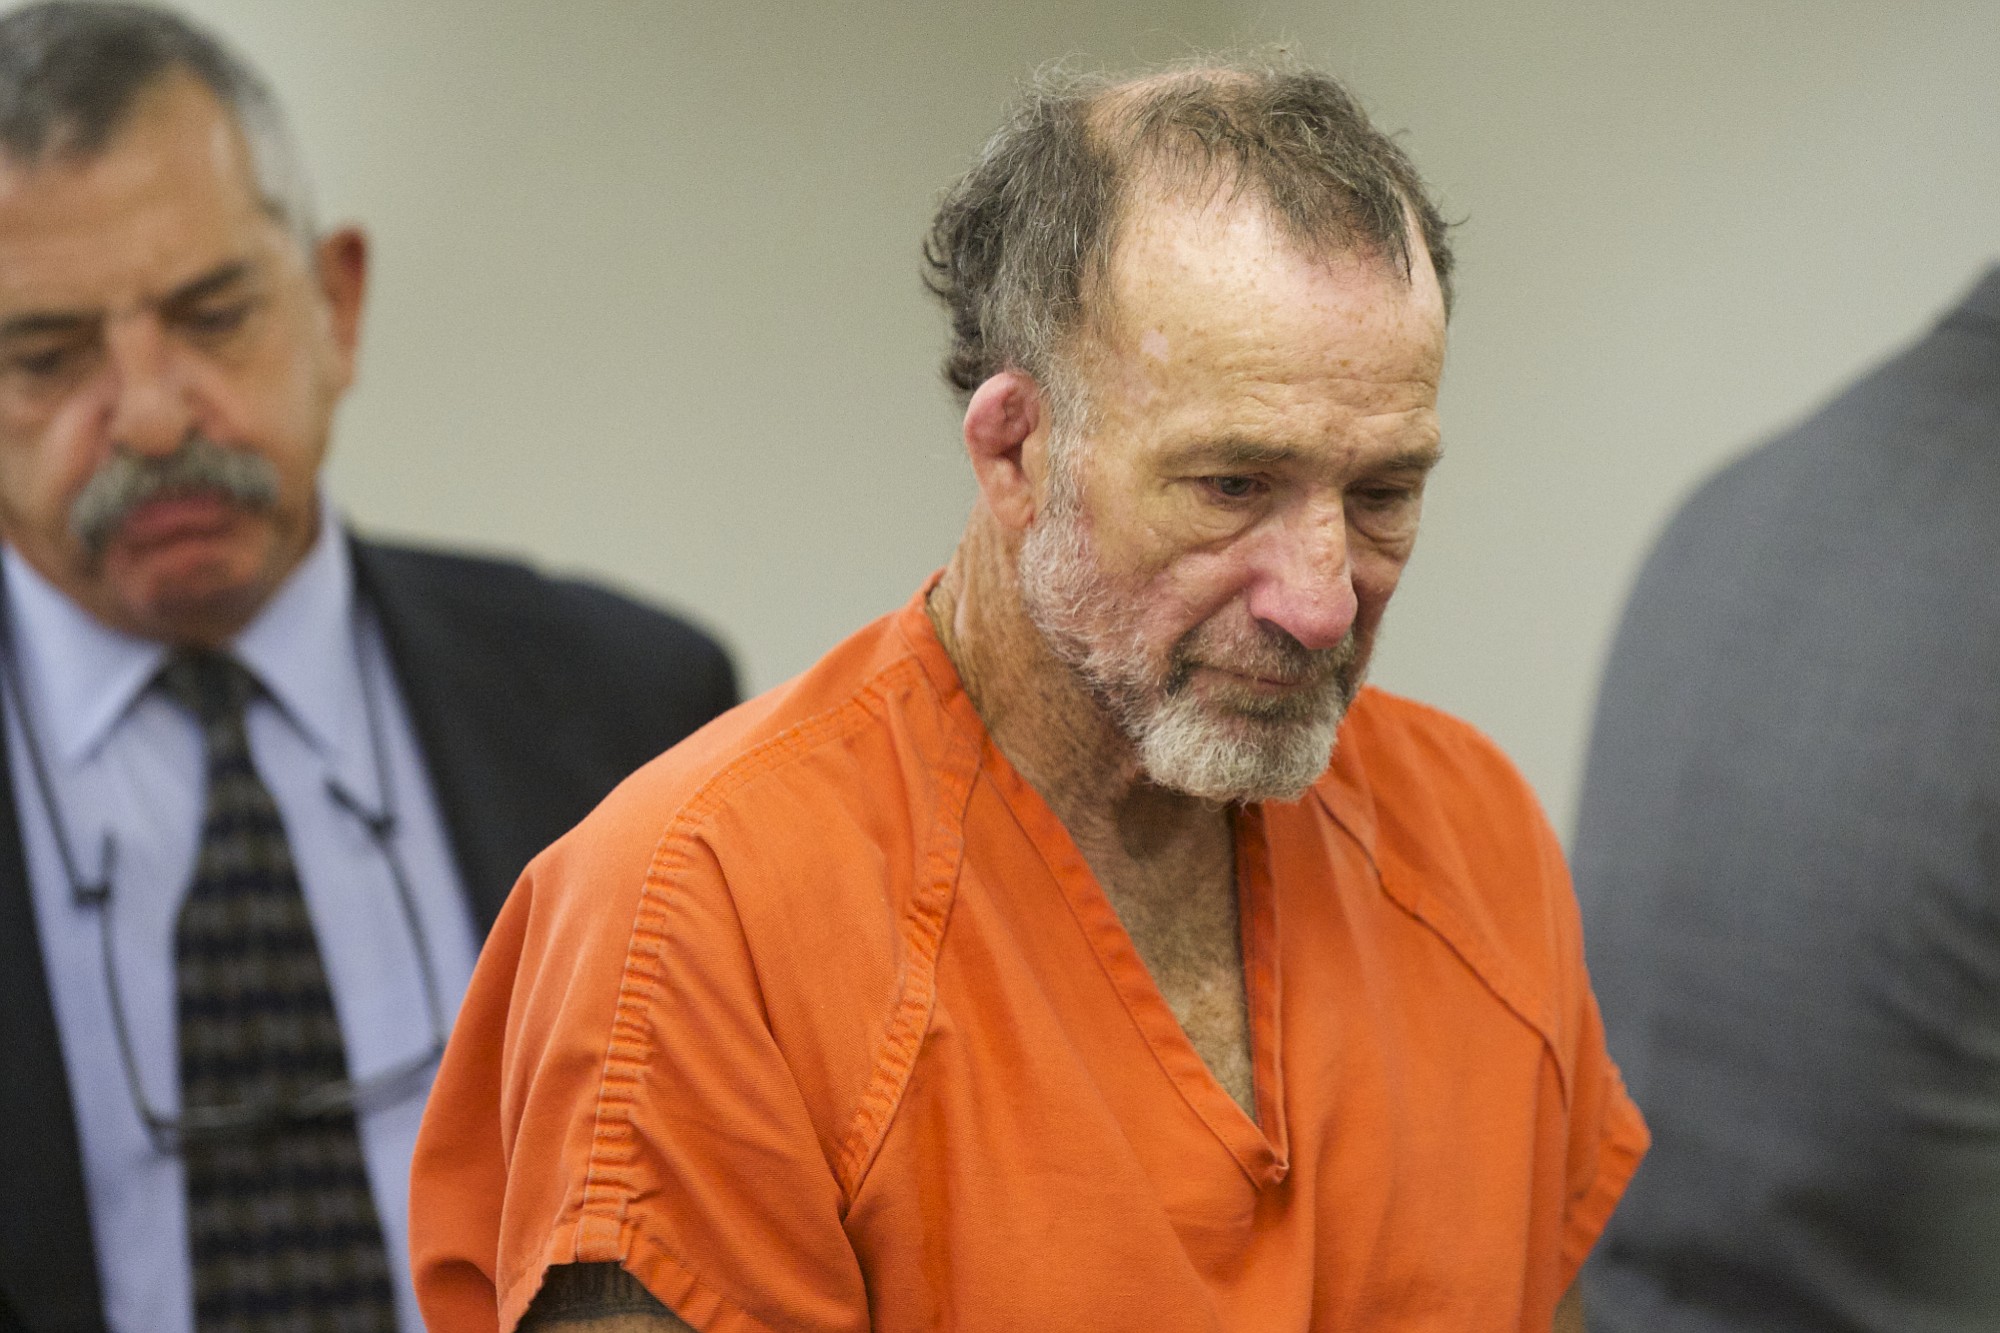 Jack Raymond Yancey, 57, a convicted sex offender with decades of criminal history in Clark County, appears in Clark County Superior Court Friday on suspicion of stabbing Gary Adams, 50, to death on Wednesday night.